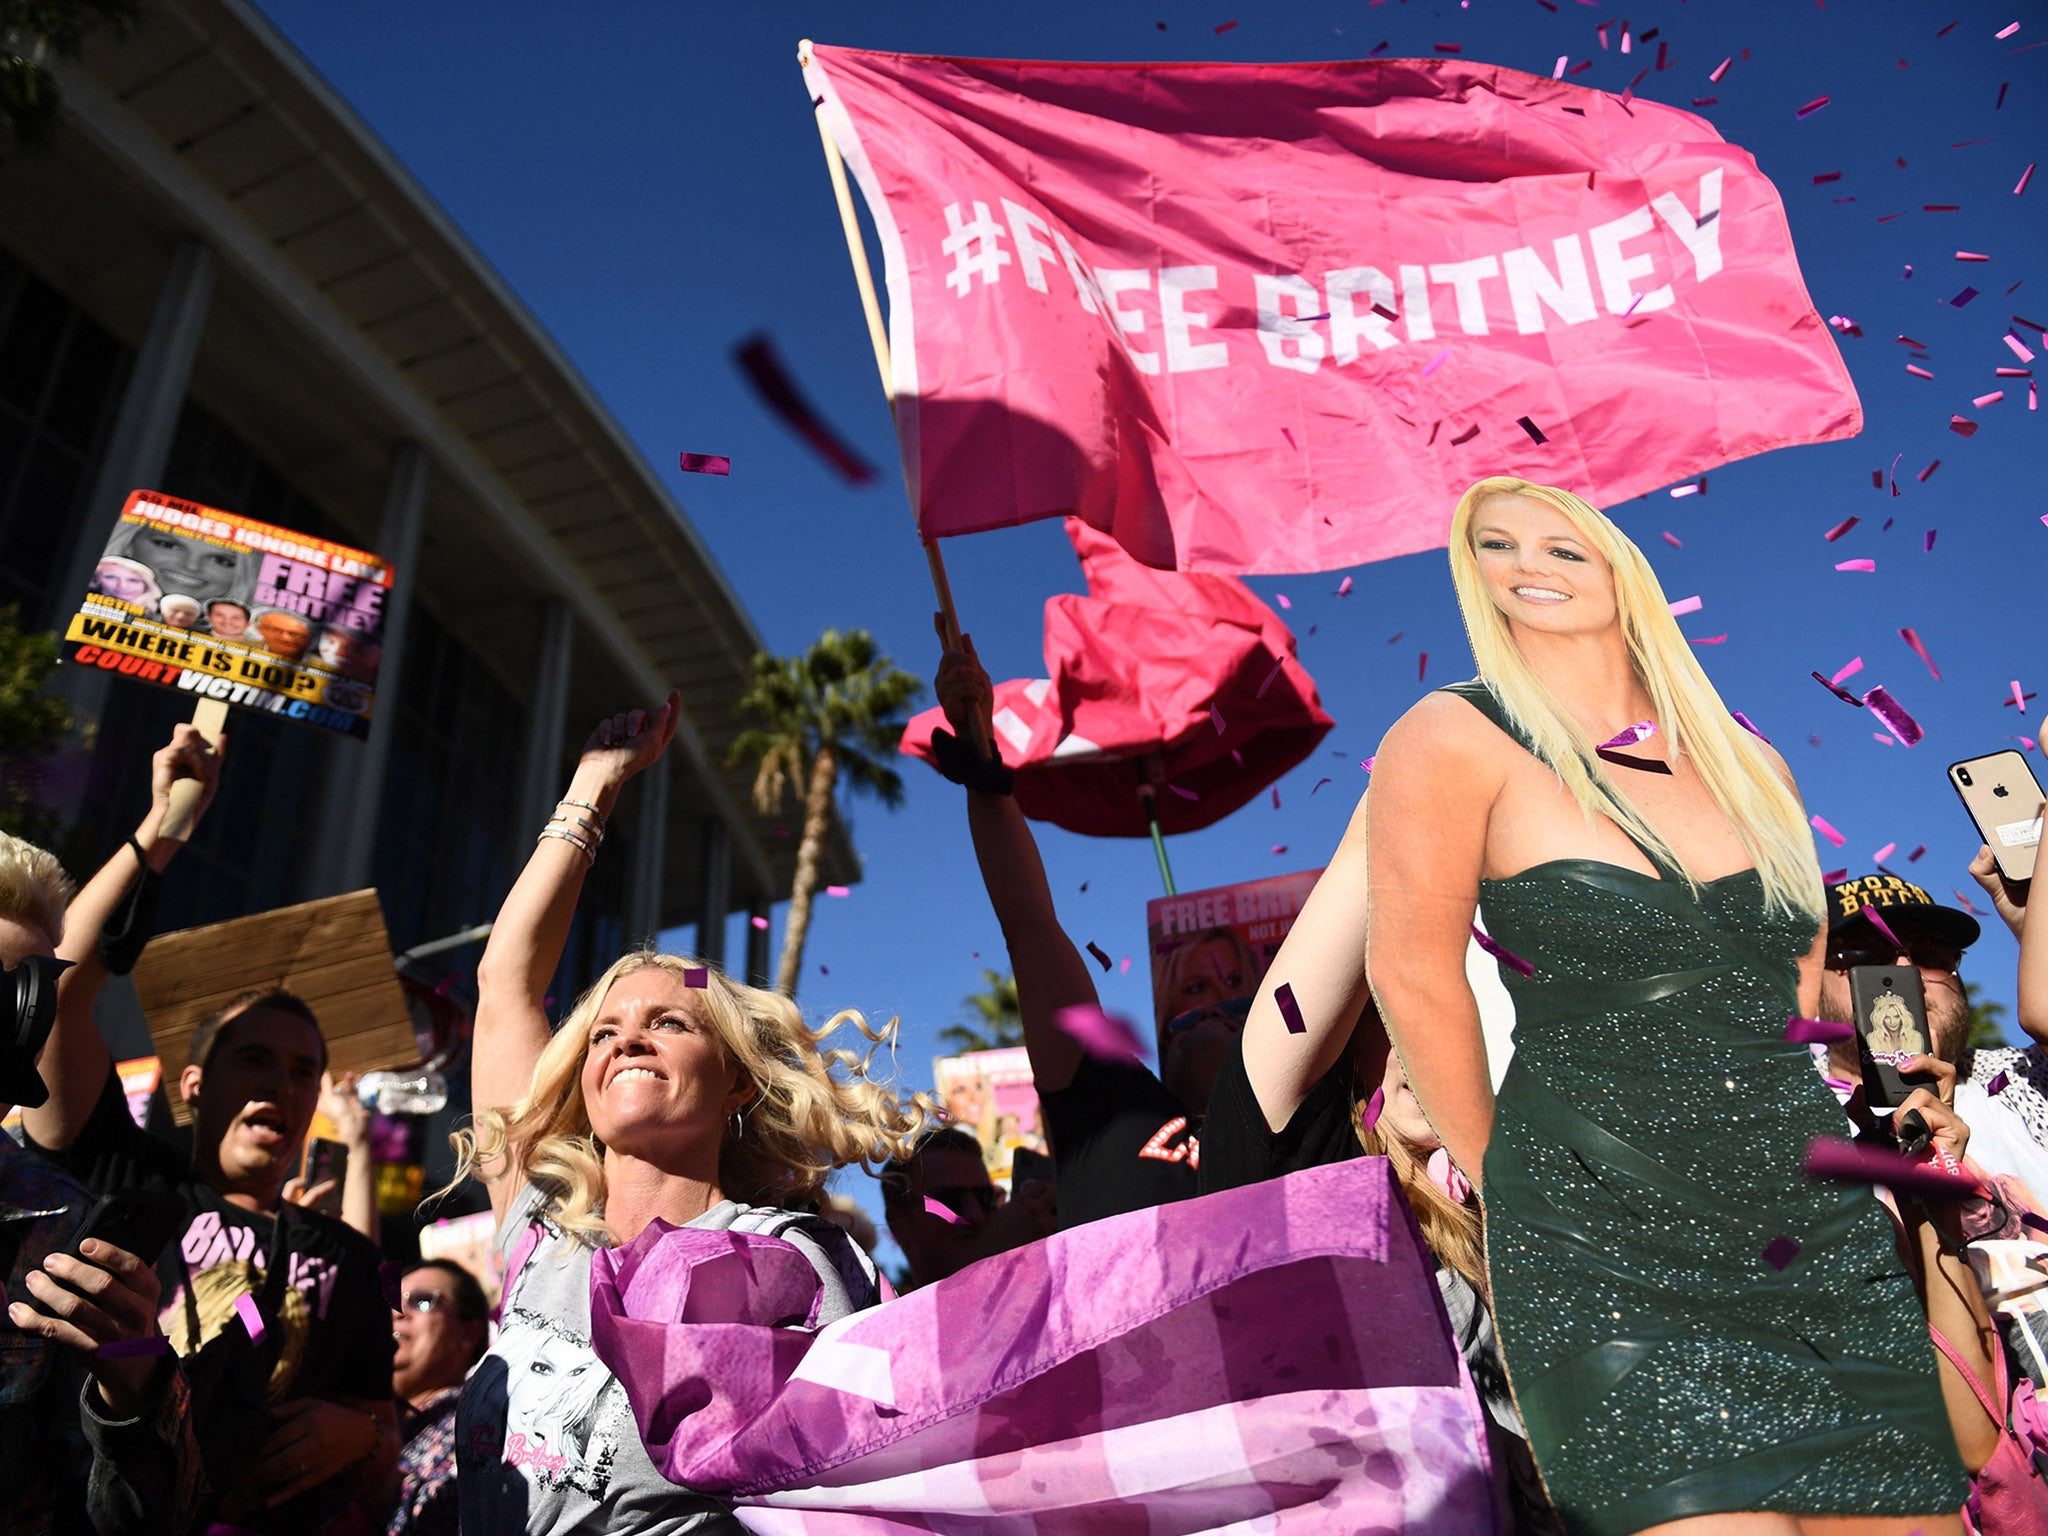 Supporters of the #FreeBritney movement gather outside her Los Angeles conservatorship hearing in November 2021